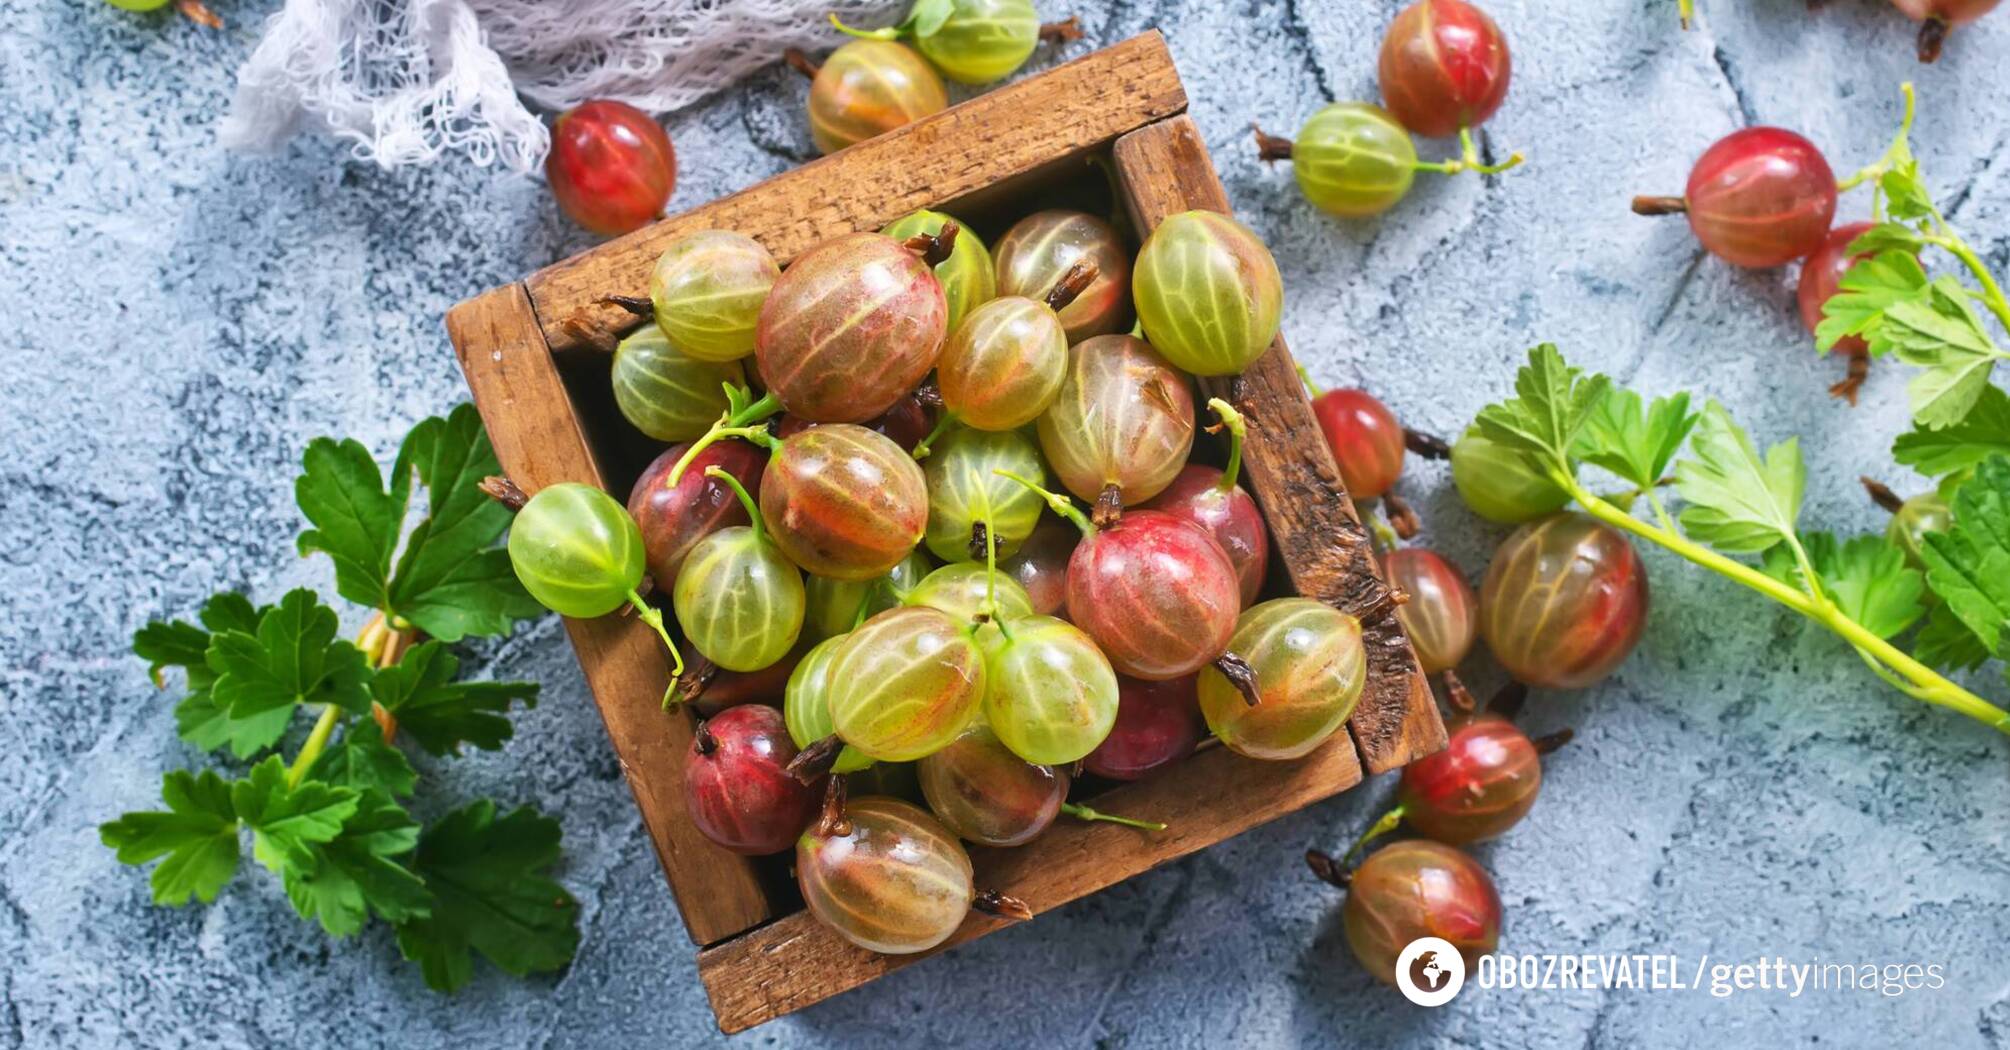 Gooseberries help to eliminate toxins from the body